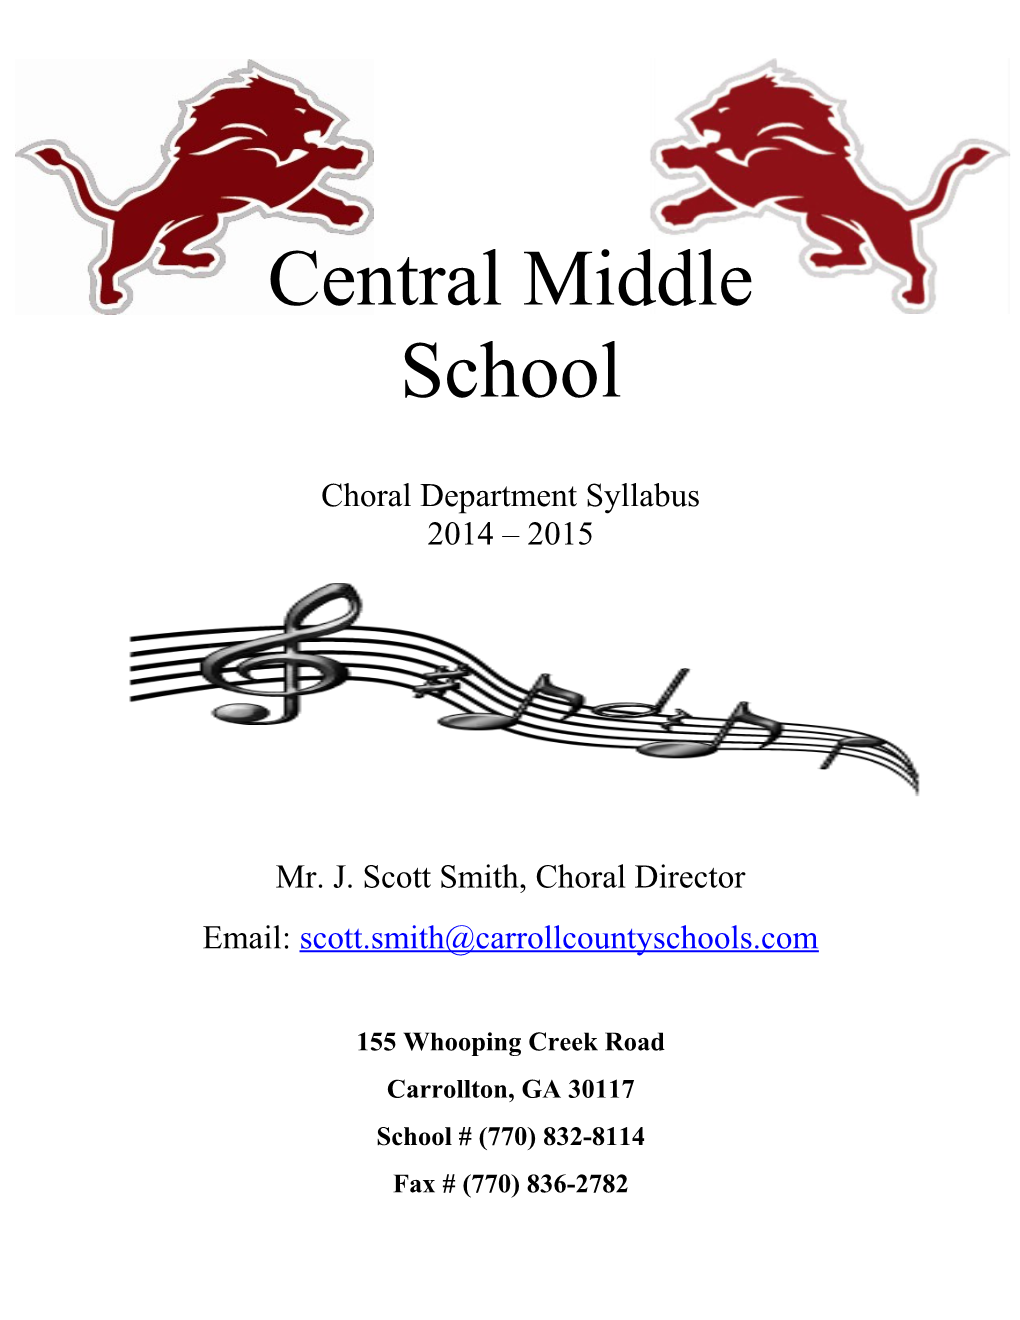 Welcome to the Central Middle Schoolchoral Department